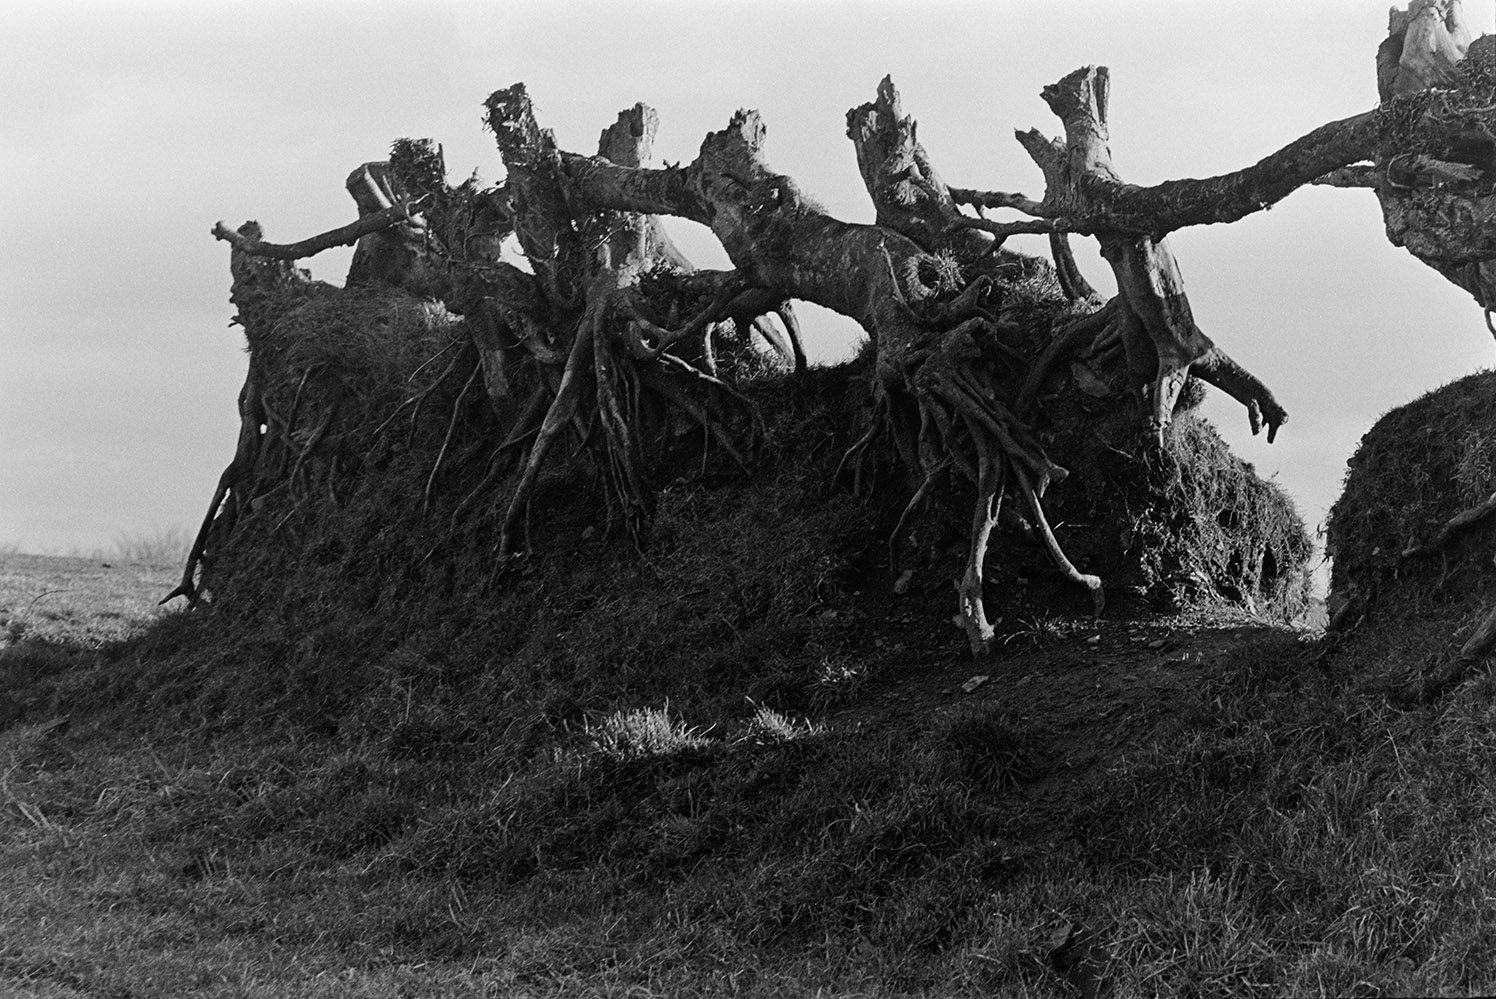 A close up view of gnarled branches and roots in a hedgerow in a field.